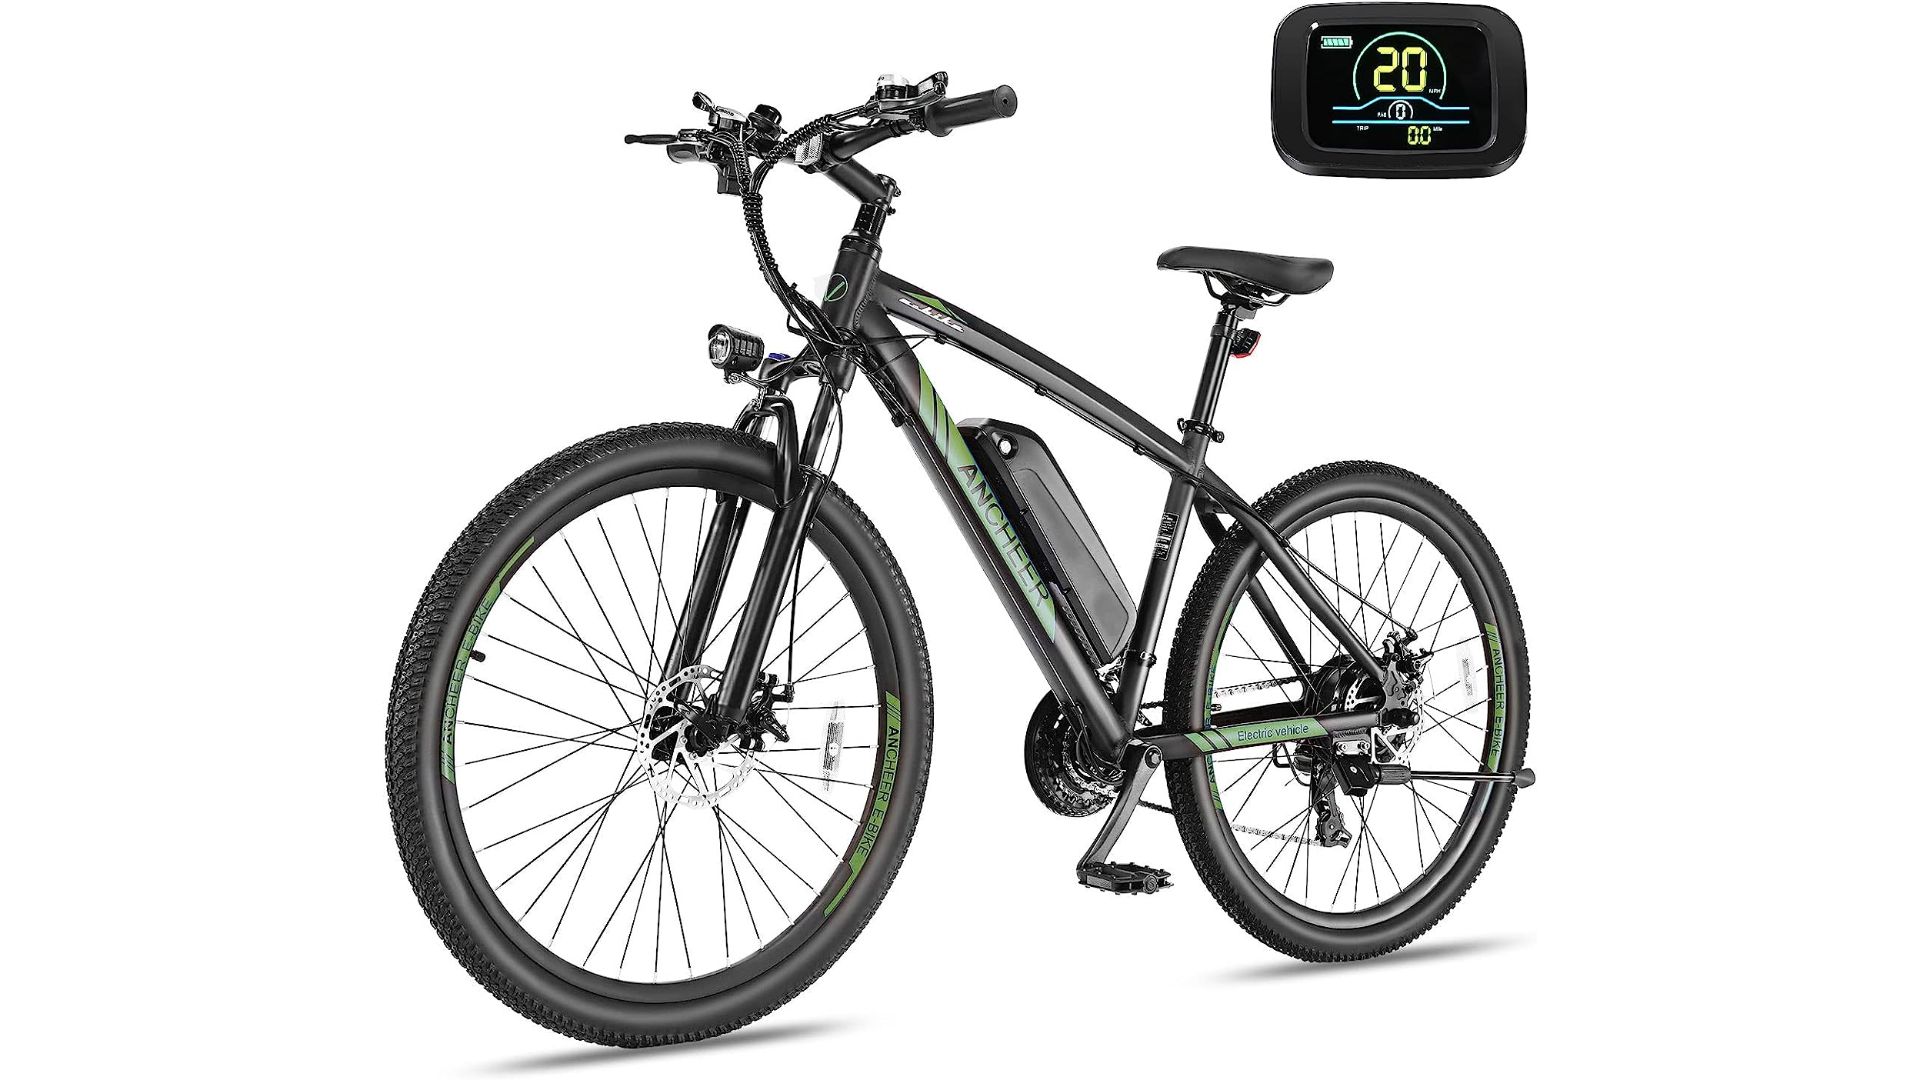 ANCHEER 500W Electric Bike Review